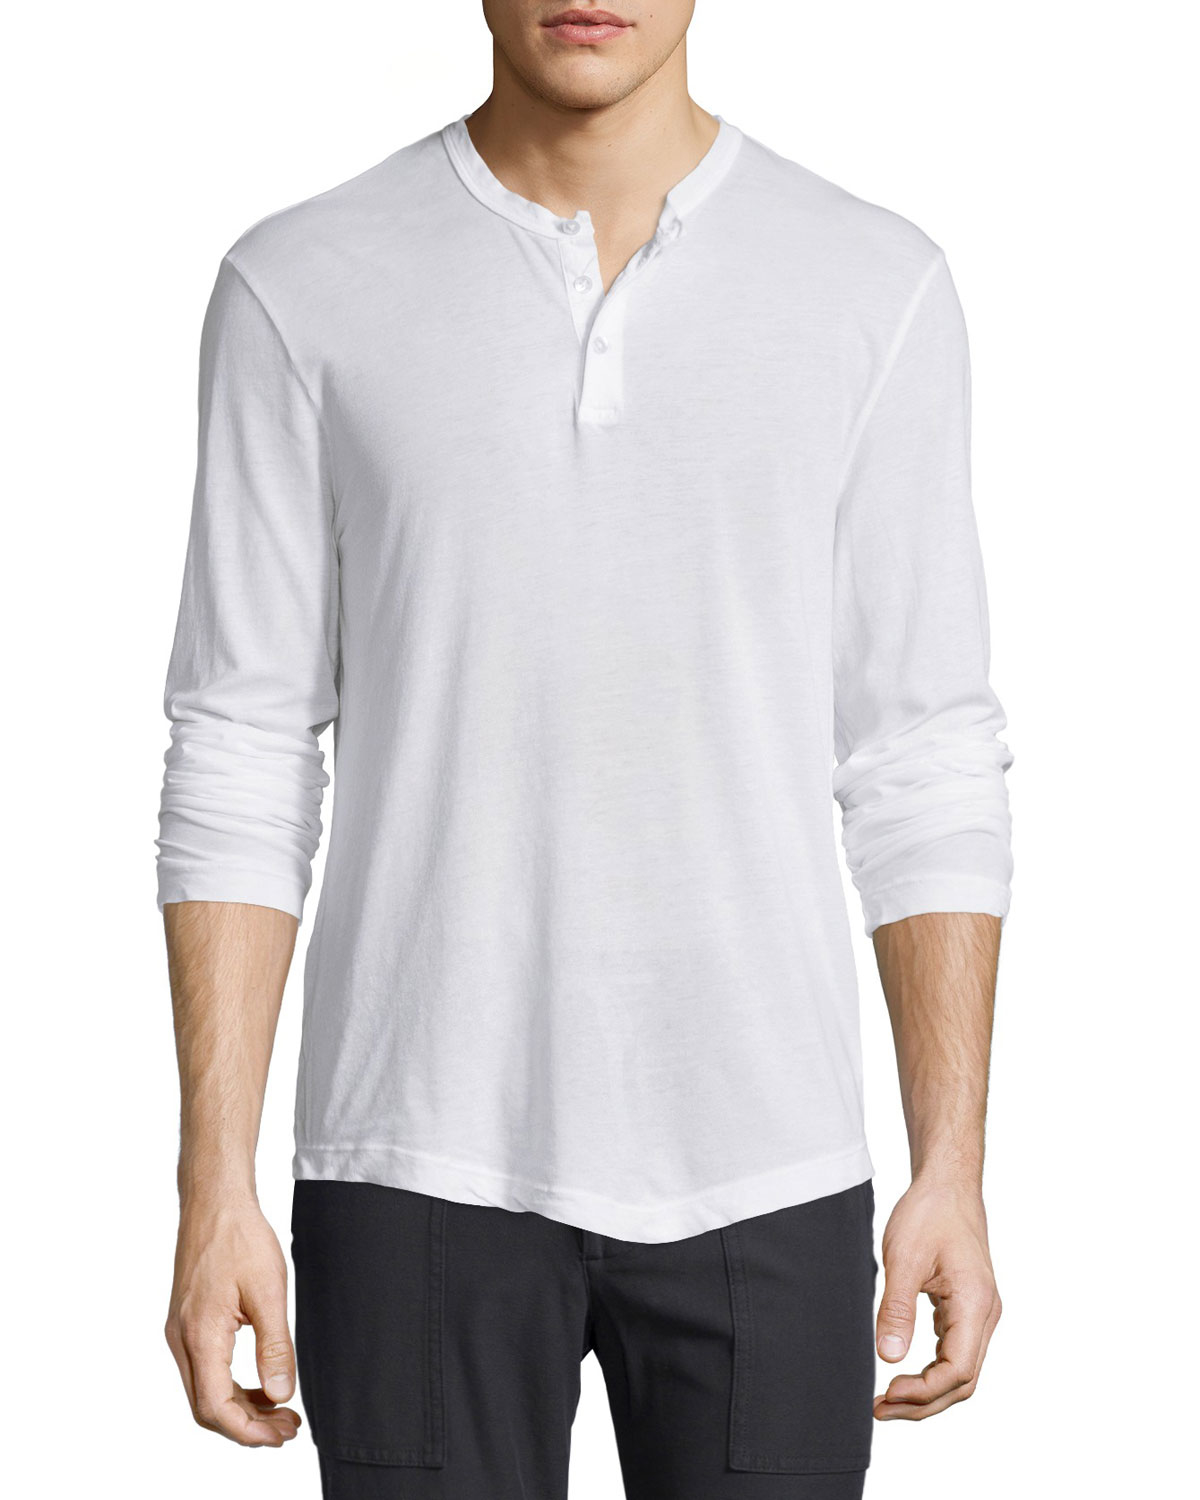 Lyst - James Perse Long-sleeve Knit Henley Shirt in White for Men